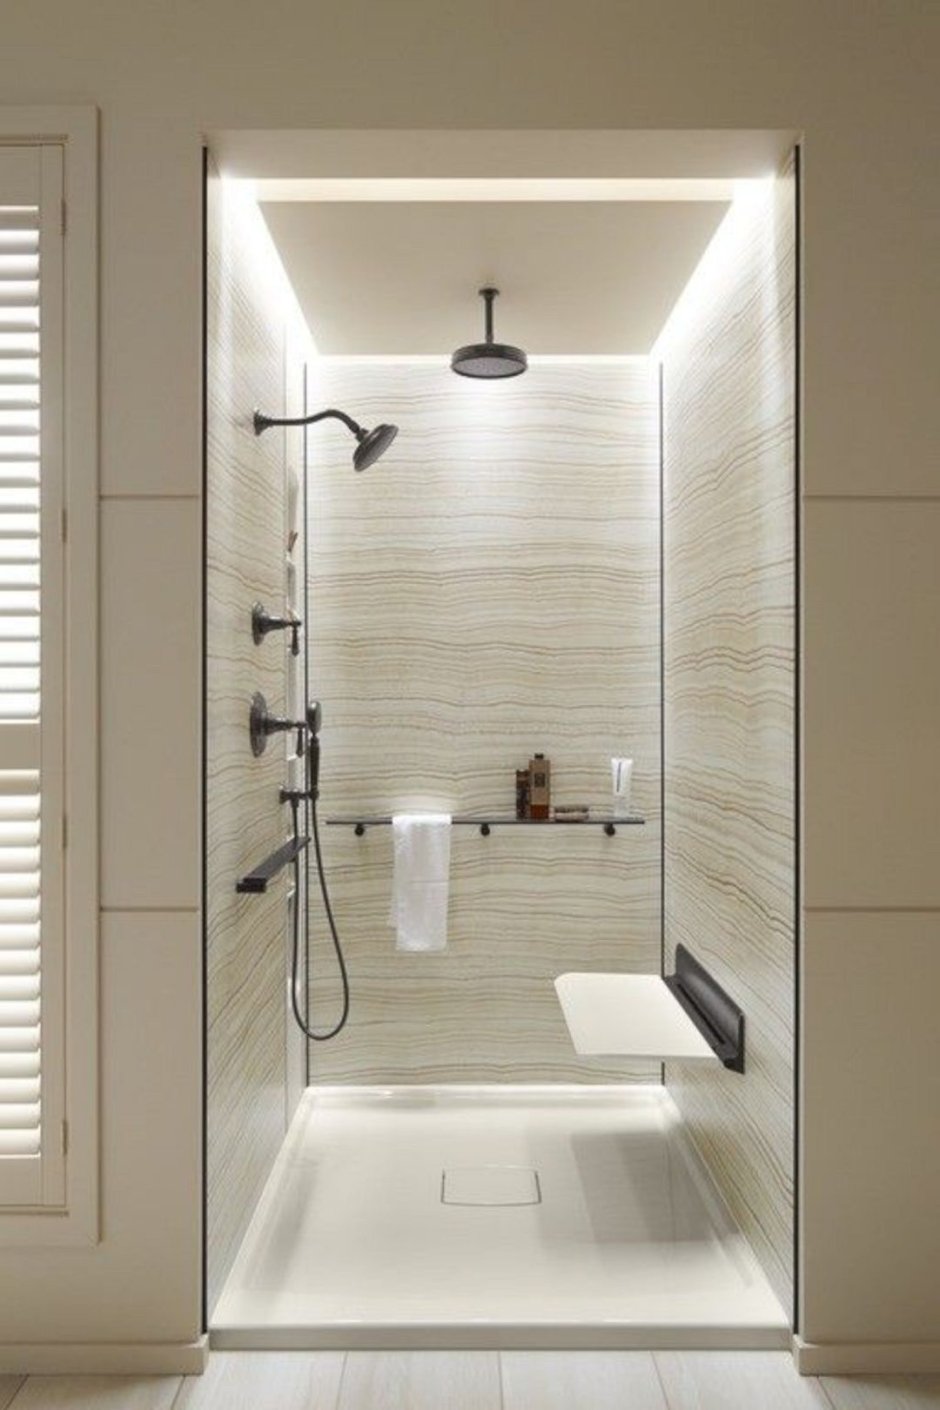 Bath with a glass partition